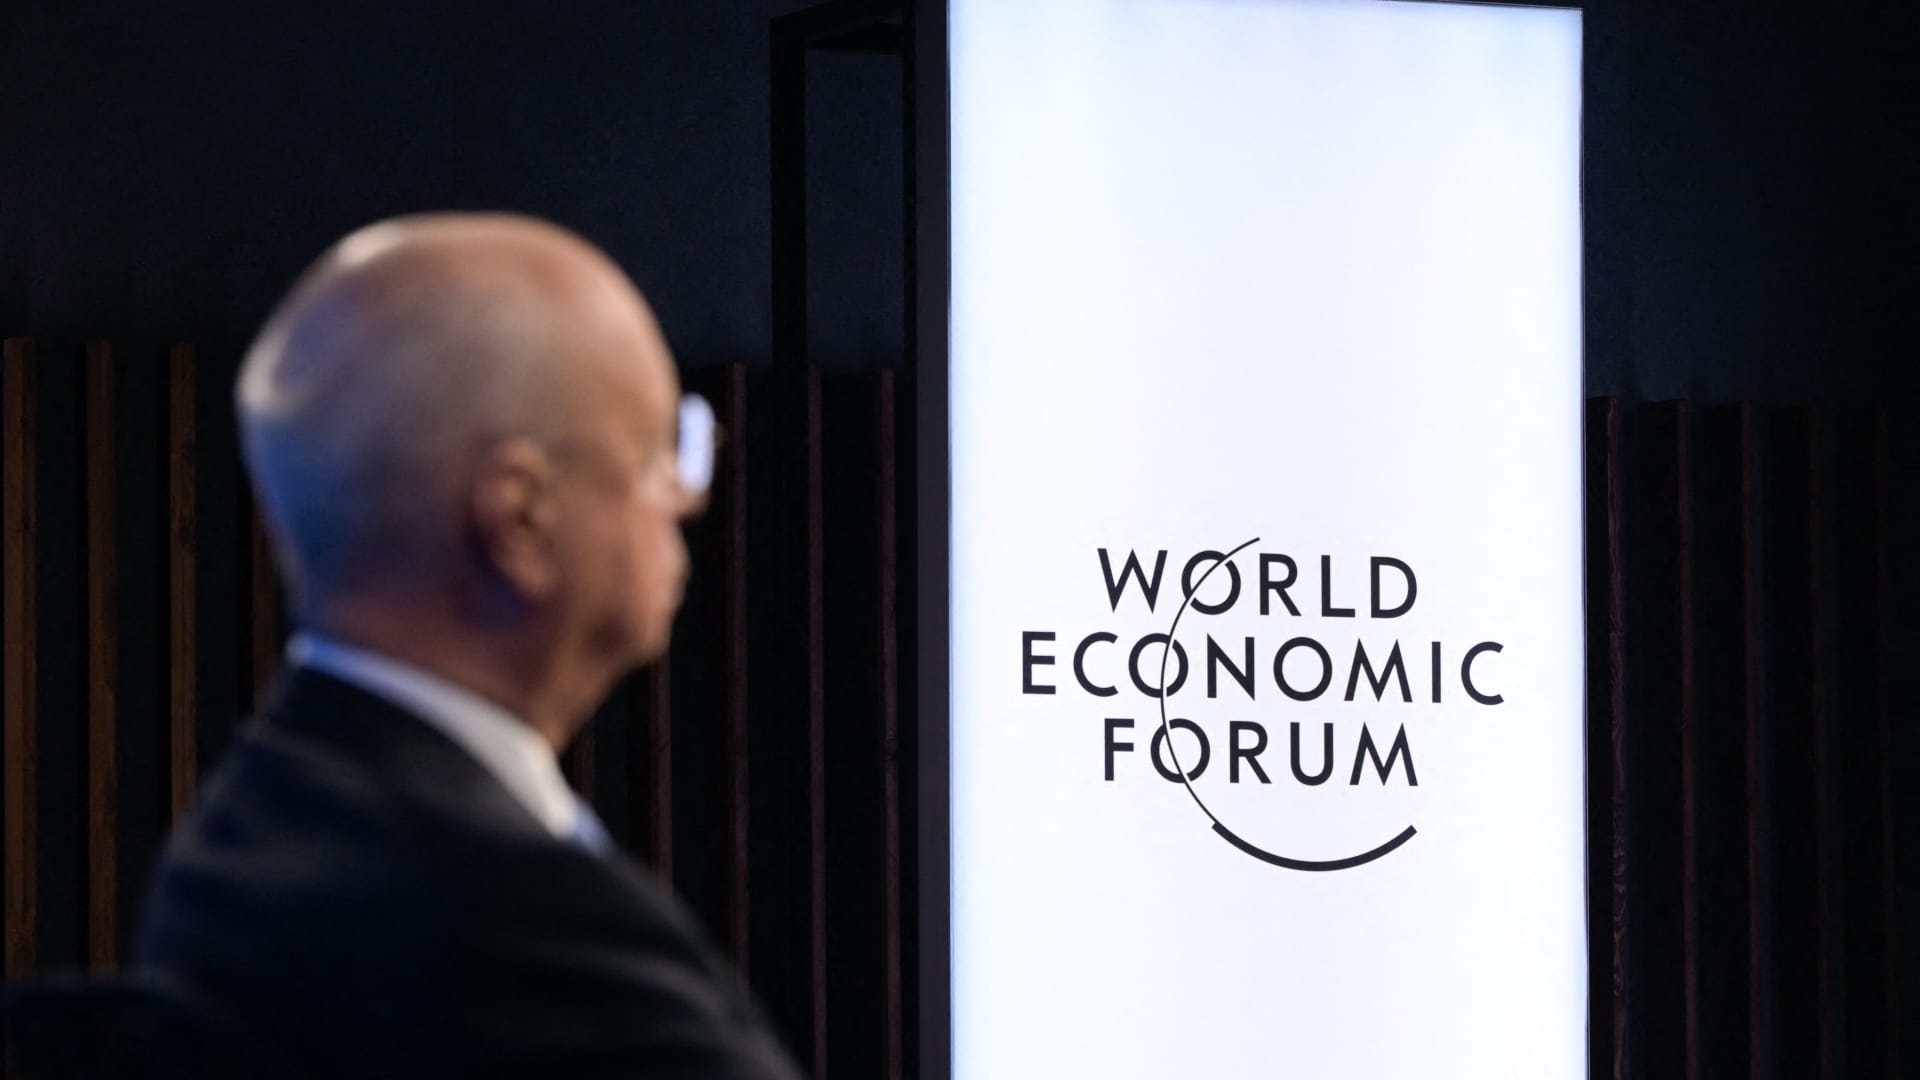 Davos is back but participants have to be vaccinated and tested – World news